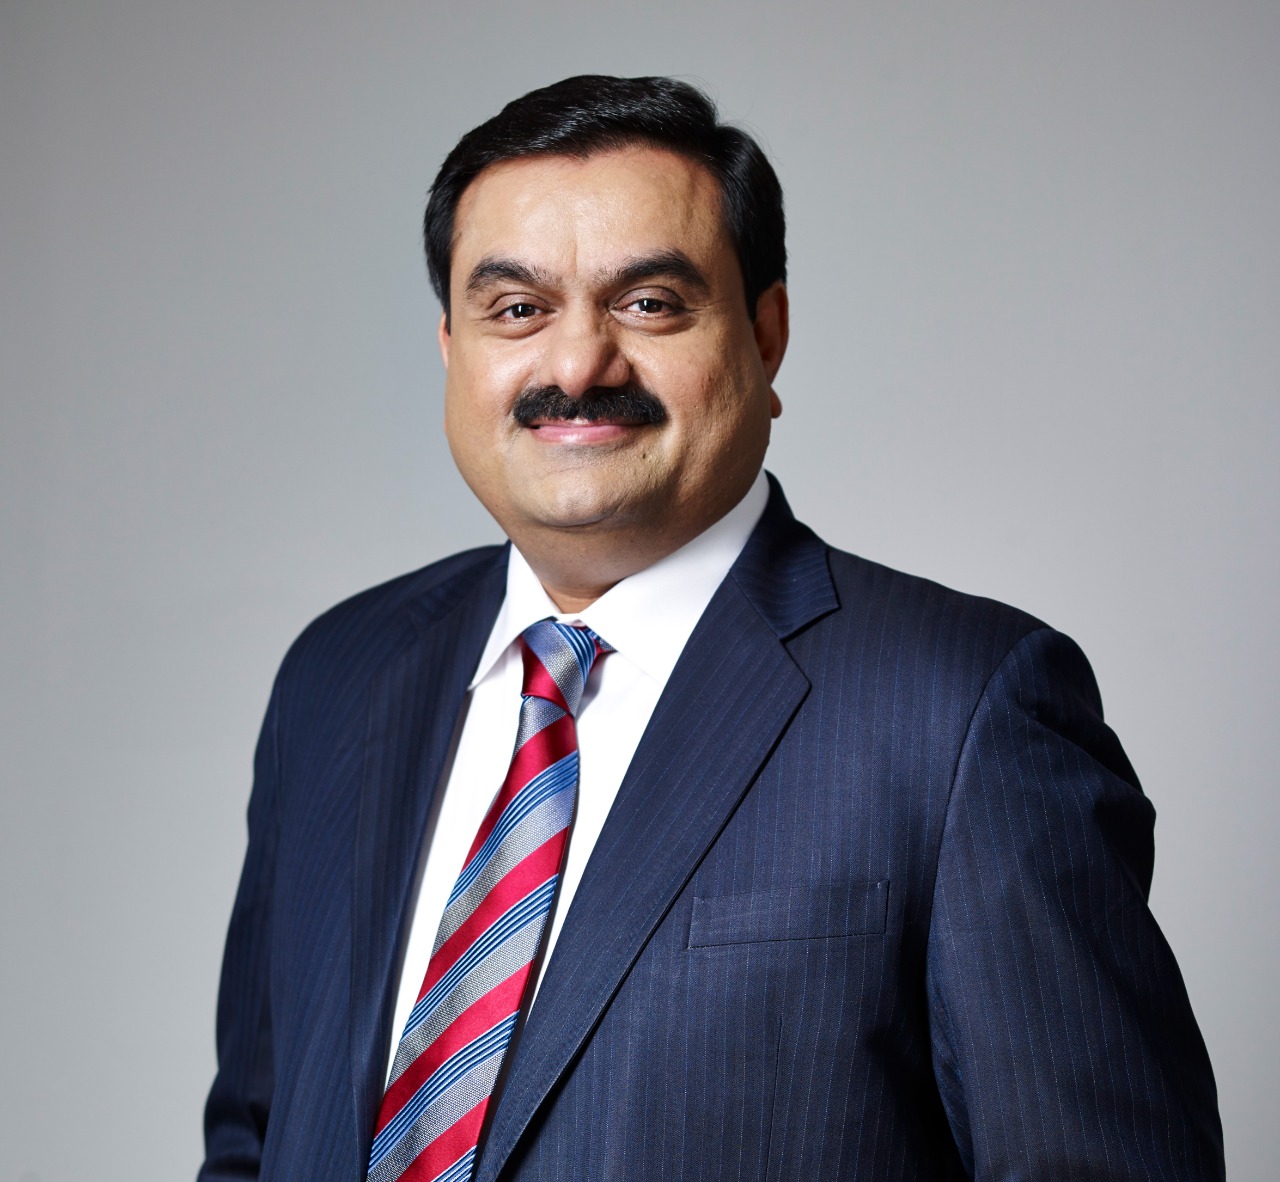 Our combined Group market capitalization this year exceeded US$ 200 billion: Gautam Adani